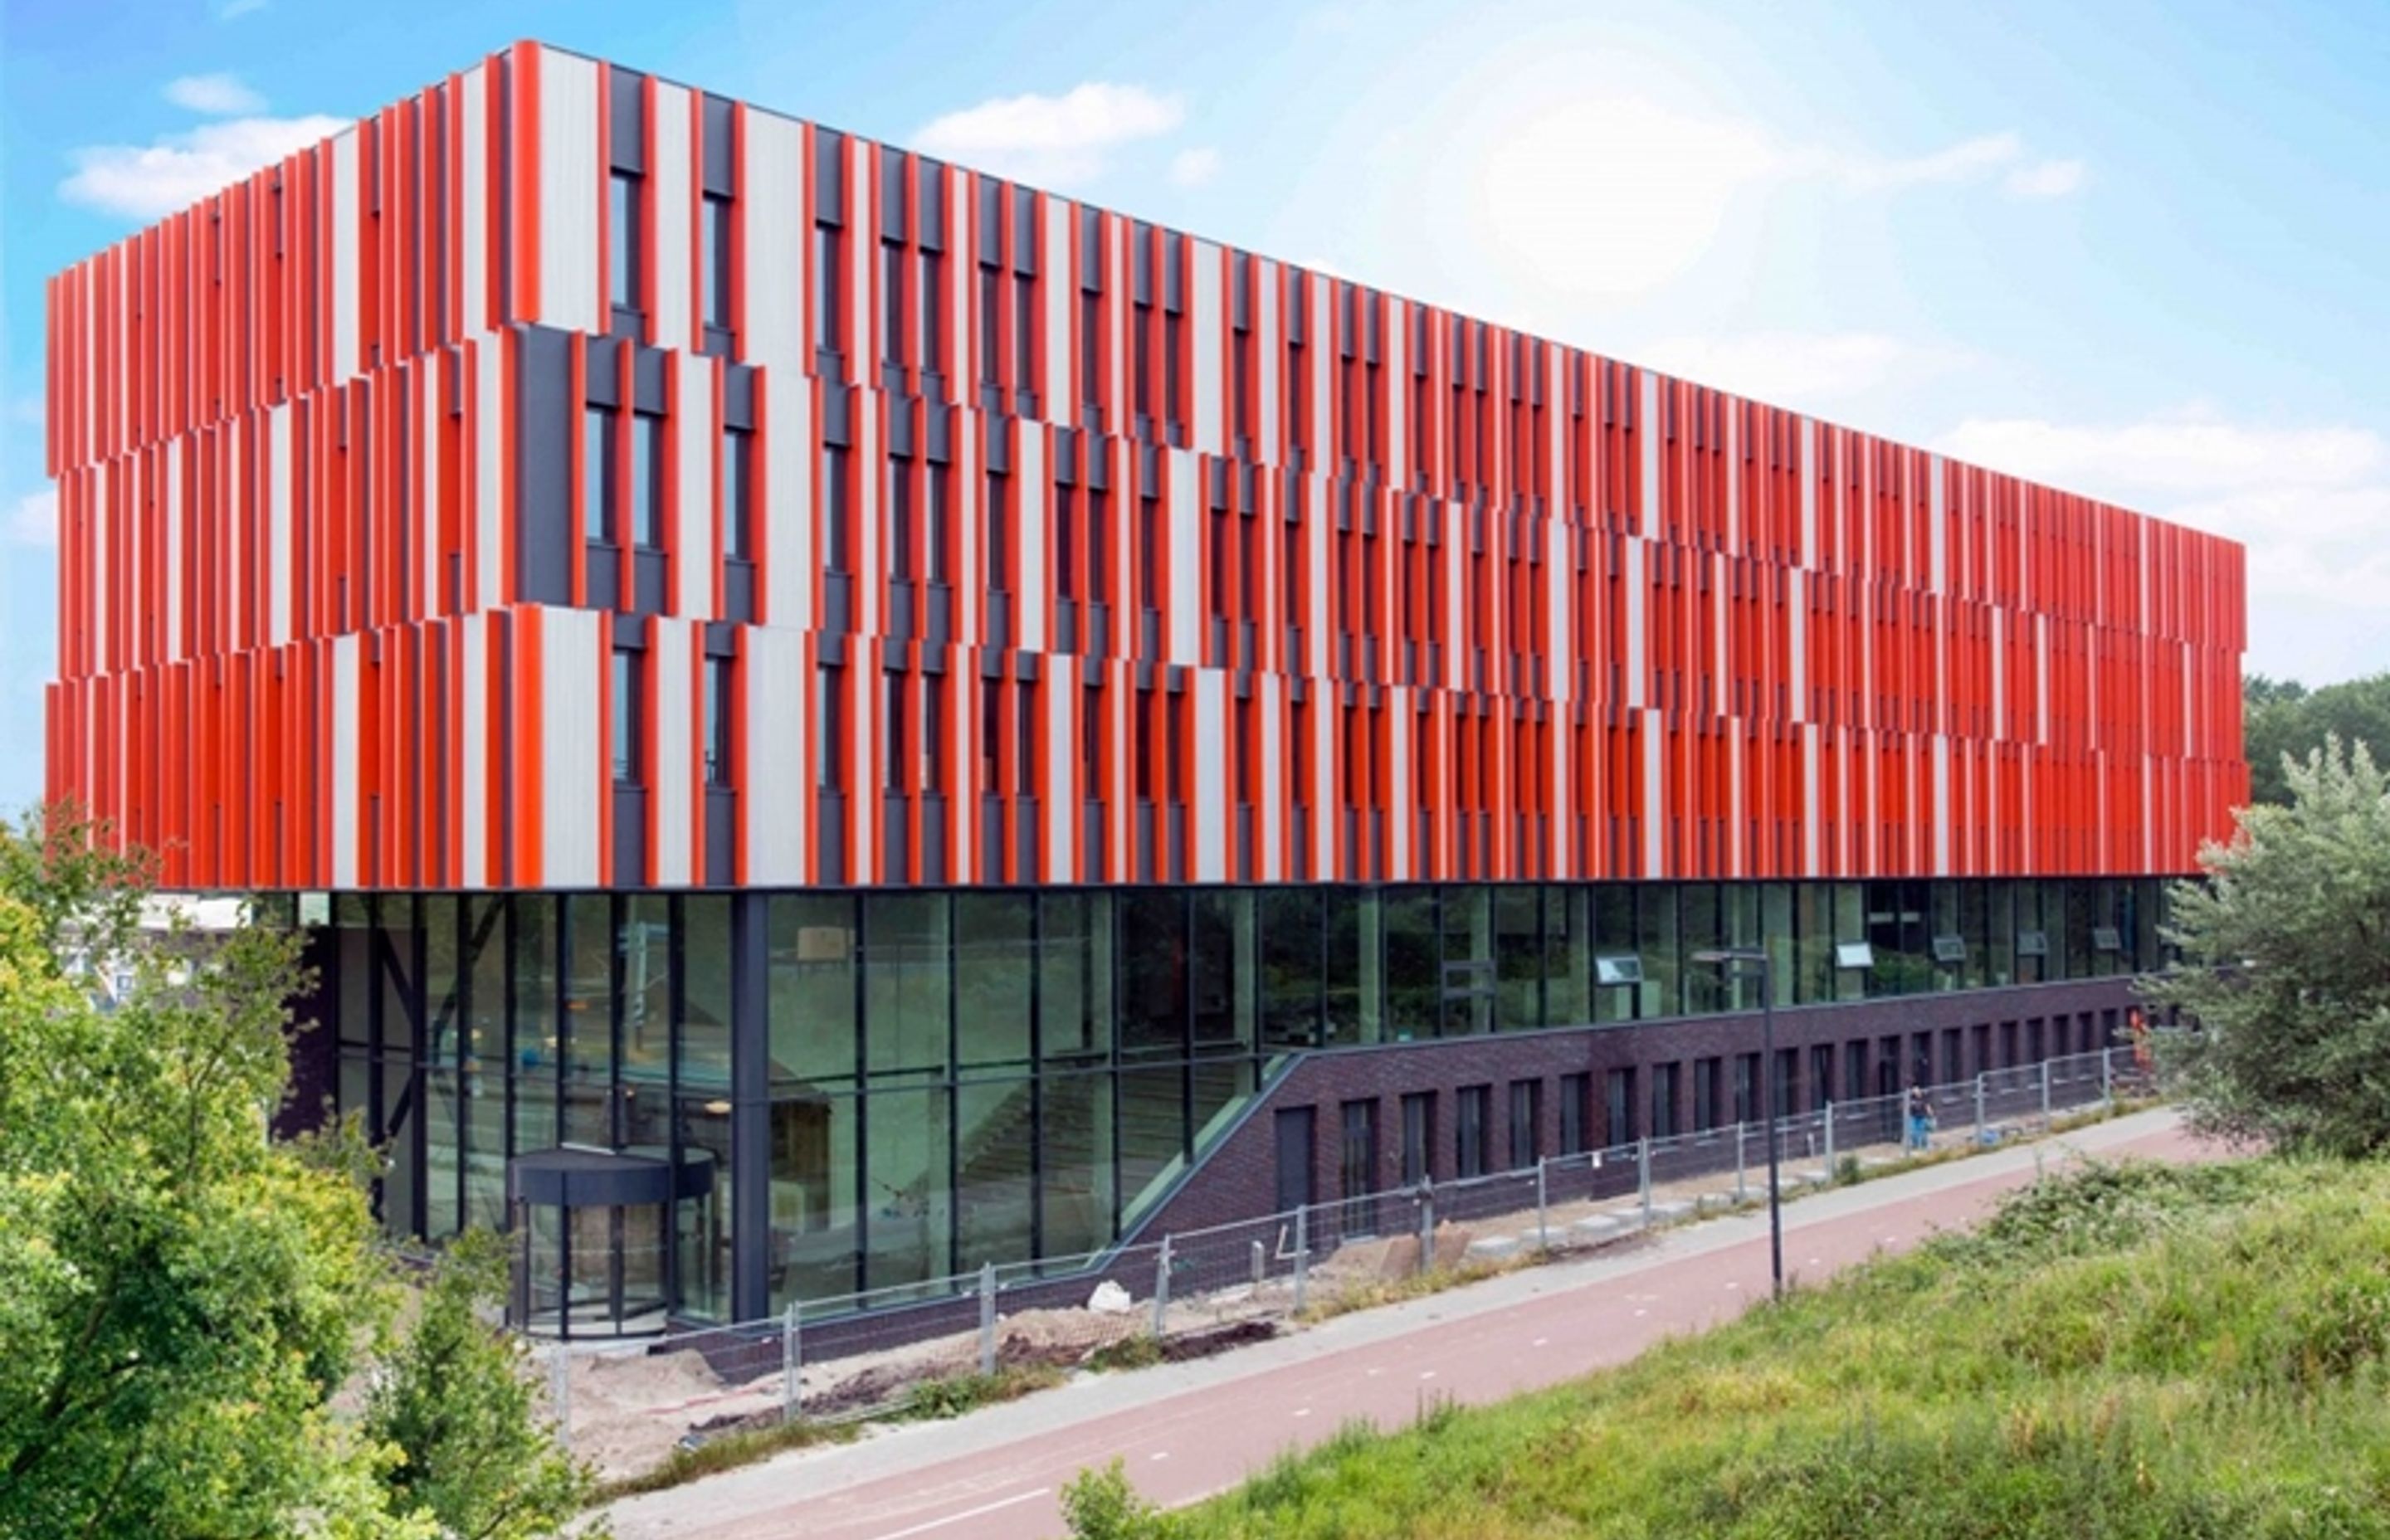 The Meubilerings College in Rotterdam employs two different EURAMAX finishes in unison creating a truly unique visual effect.